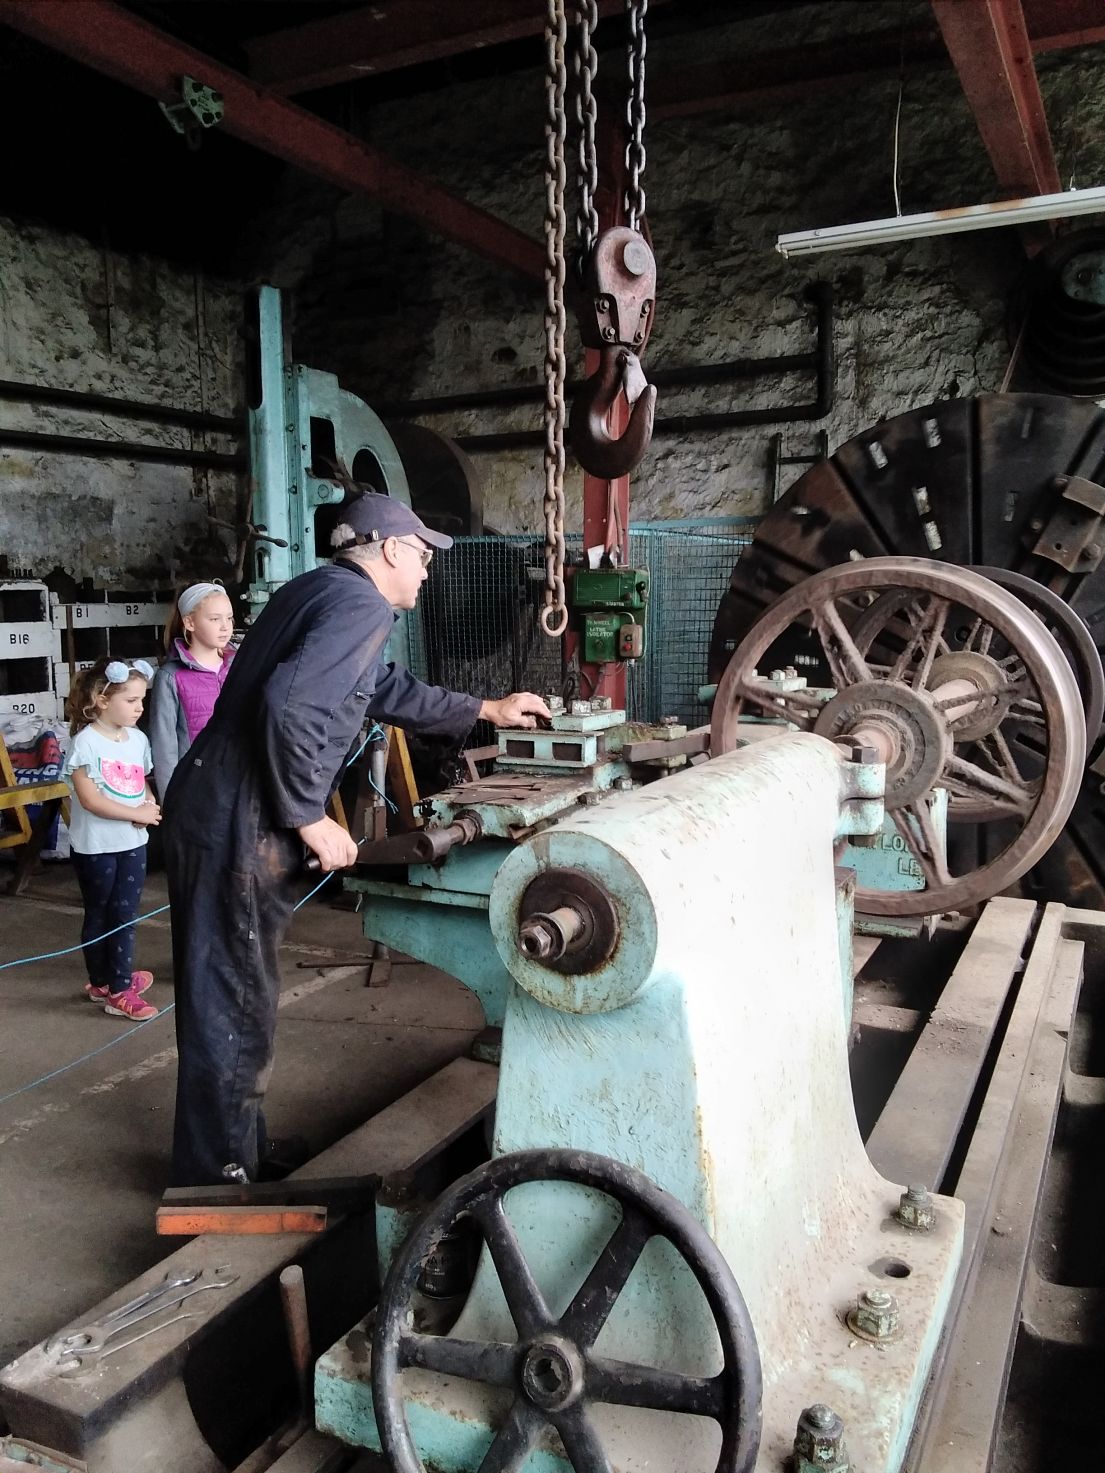 A man in dirty navy blue work overalls and cap demonstrating machinery with wheels, to two girls who look on.